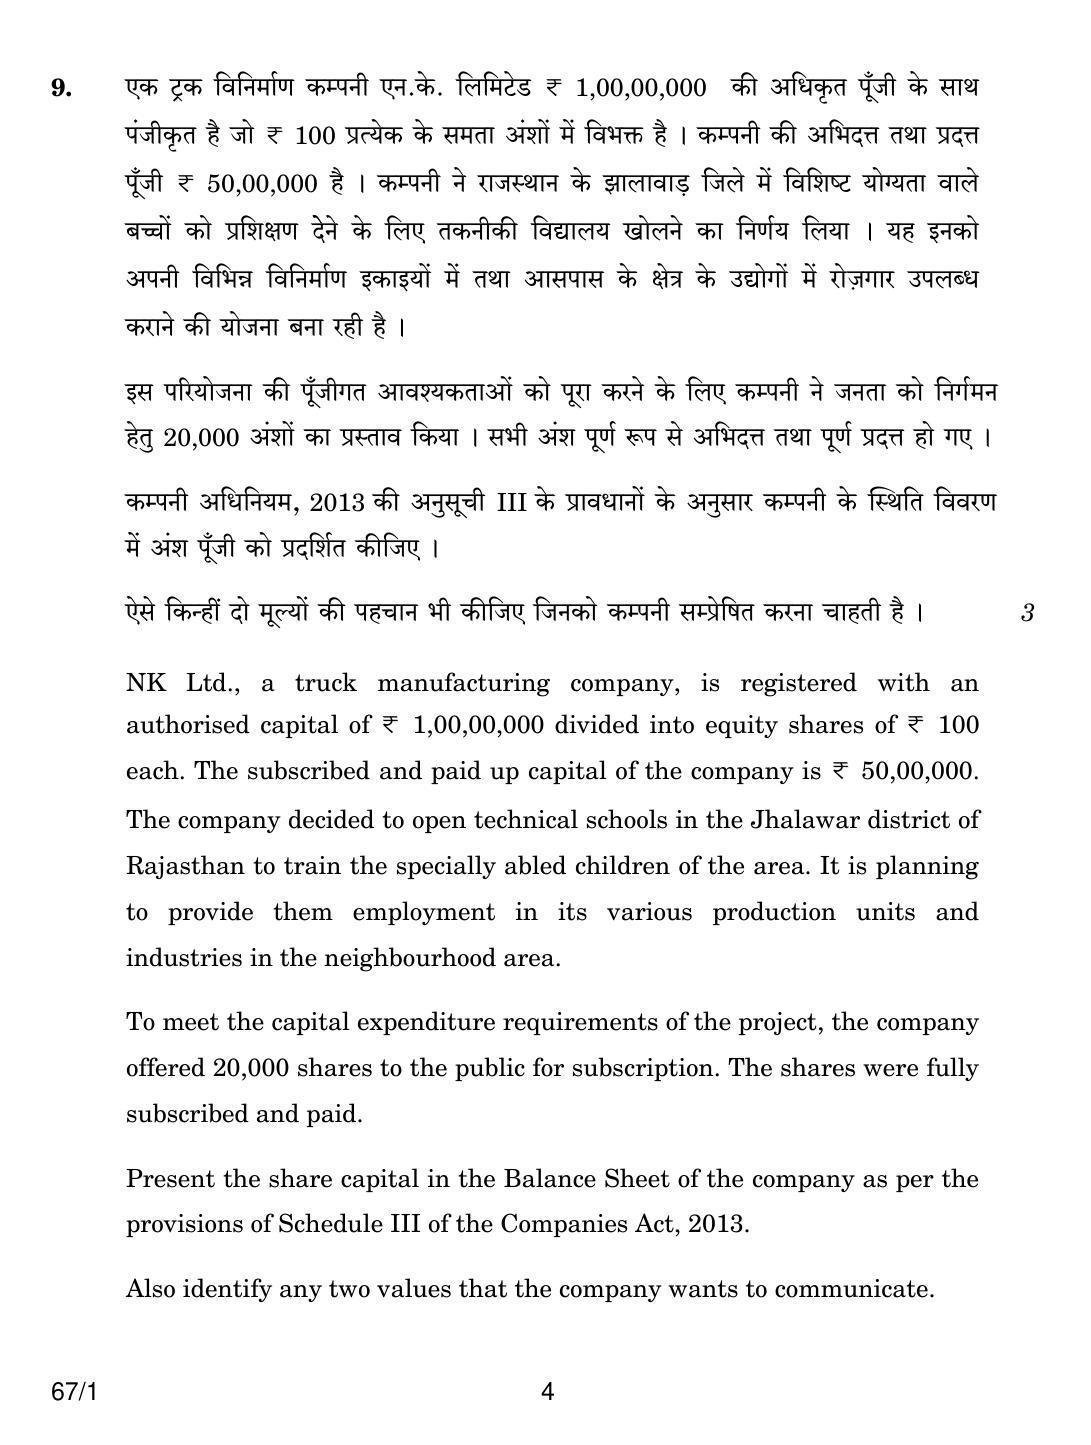 CBSE Class 12 67-1 ACCOUNTANCY 2018 Question Paper - Page 4